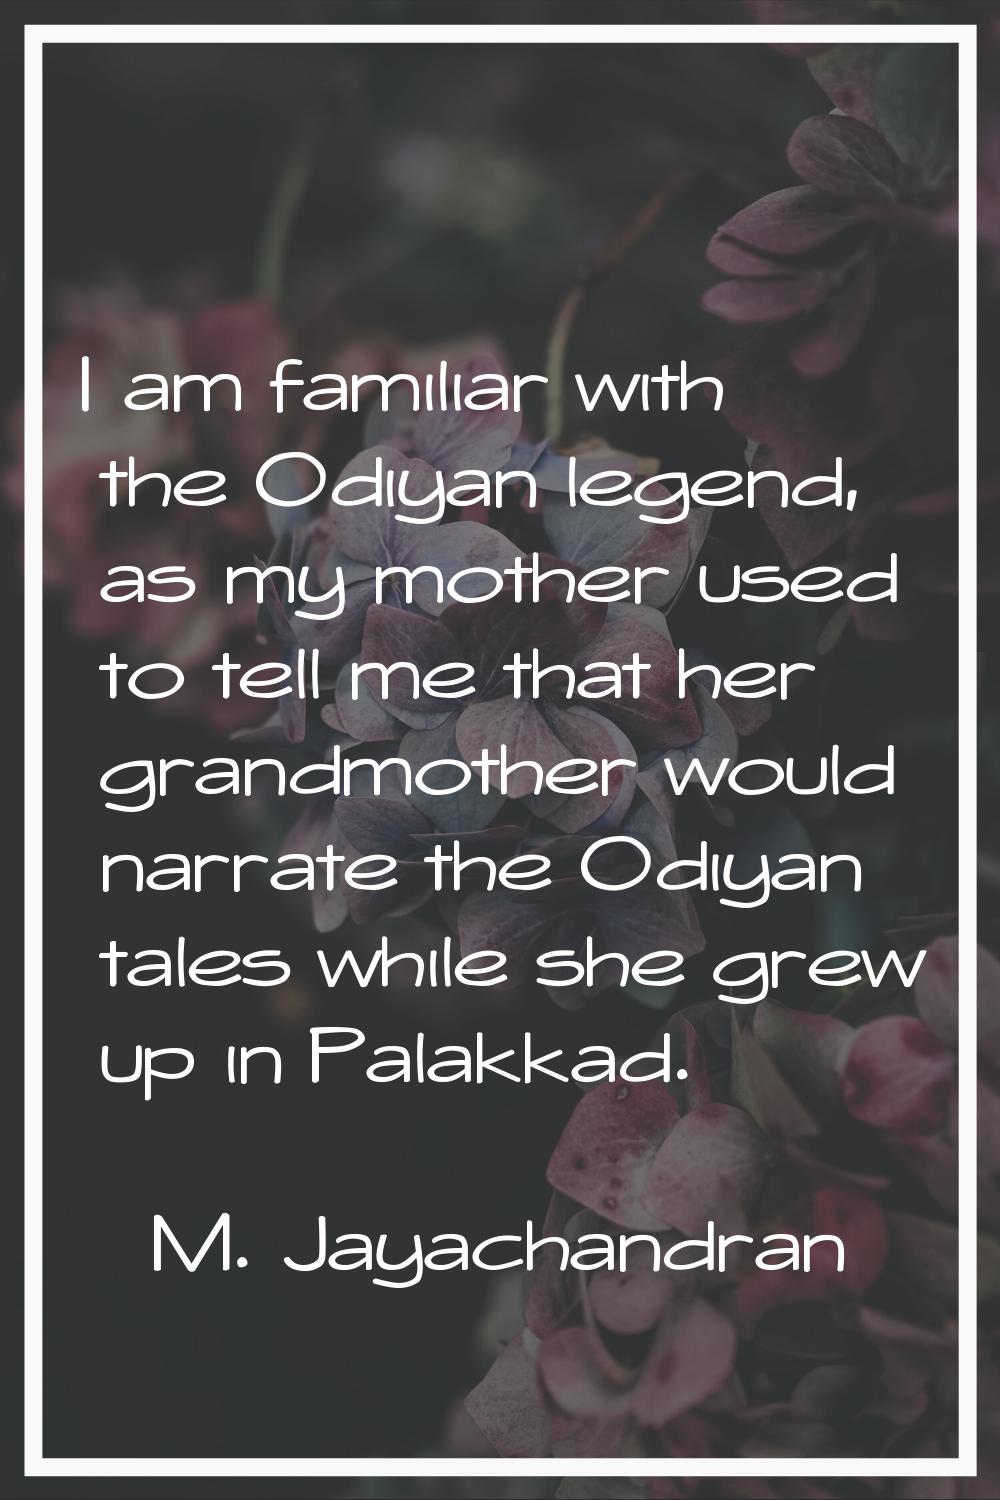 I am familiar with the Odiyan legend, as my mother used to tell me that her grandmother would narra